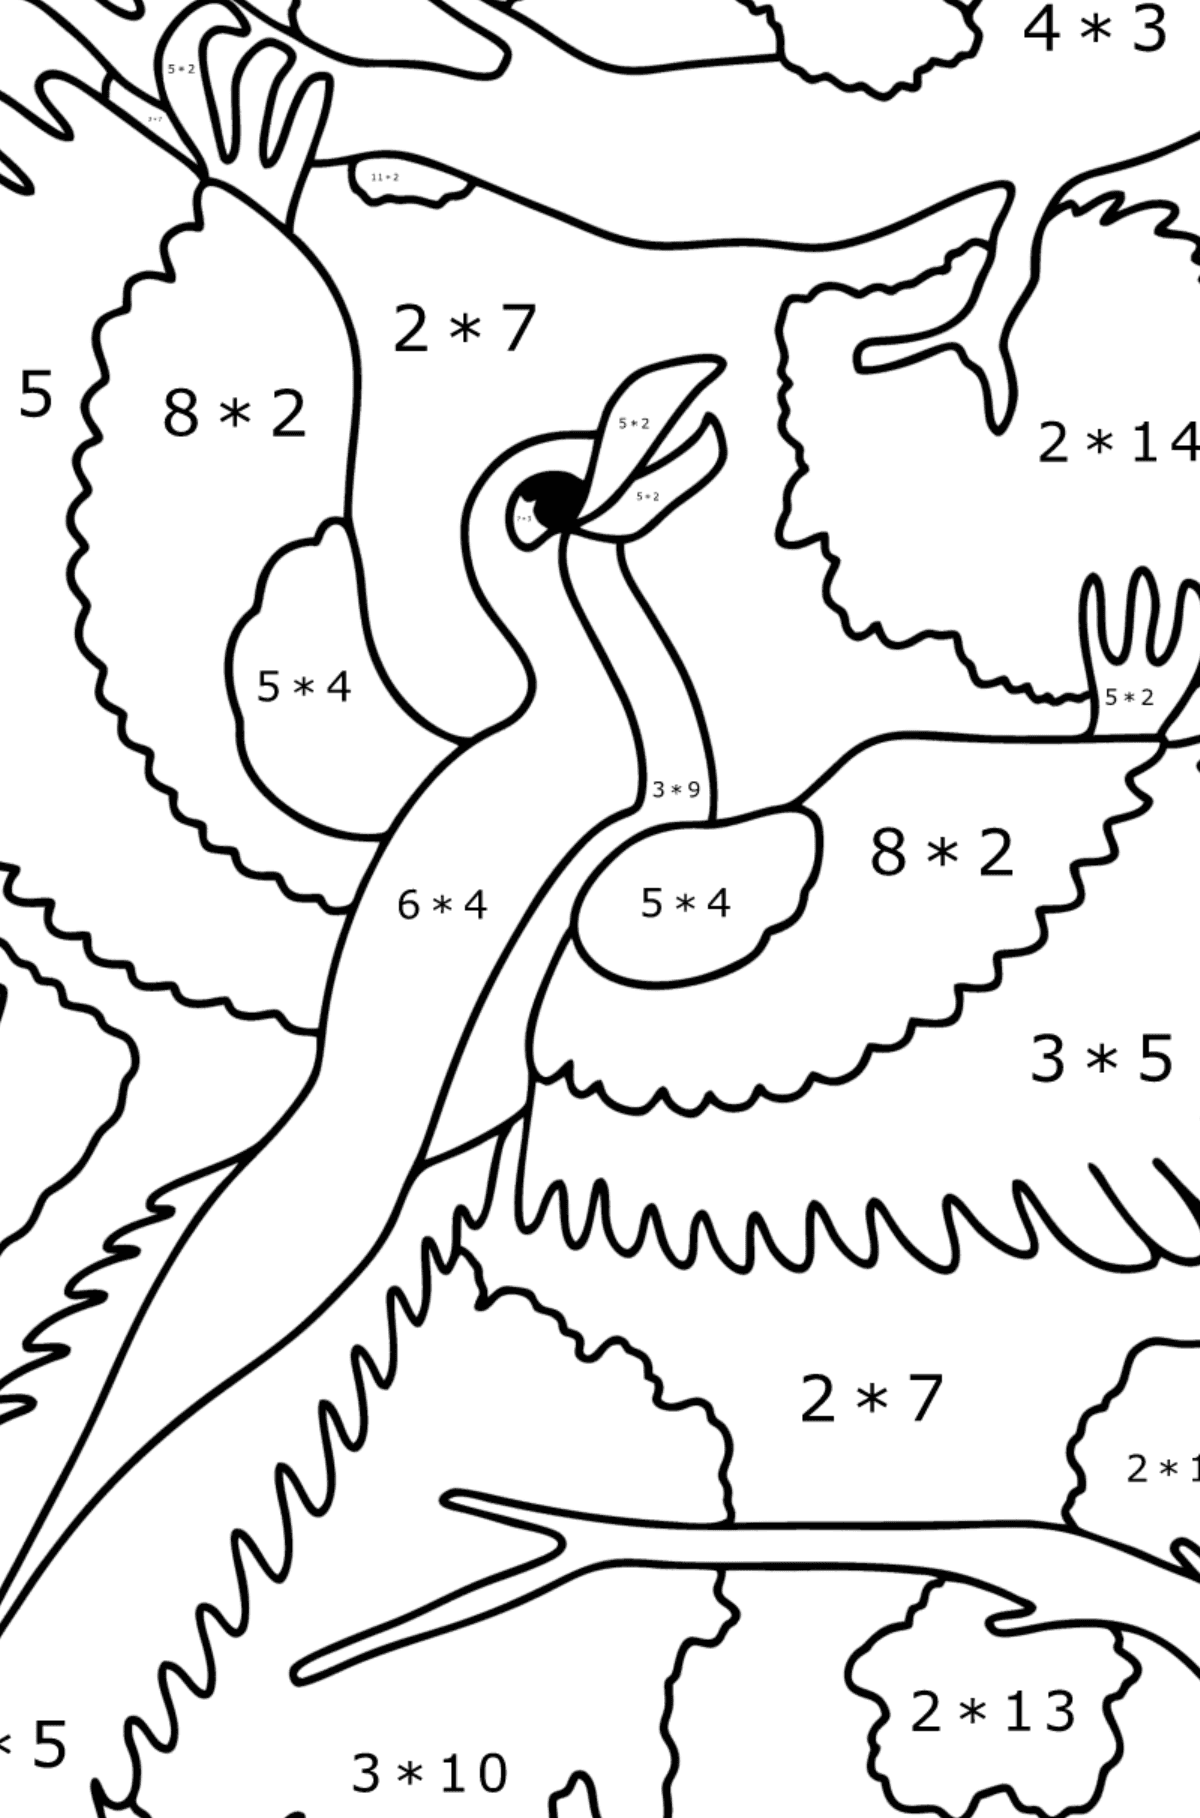 Archeopteryx coloring page - Math Coloring - Multiplication for Kids